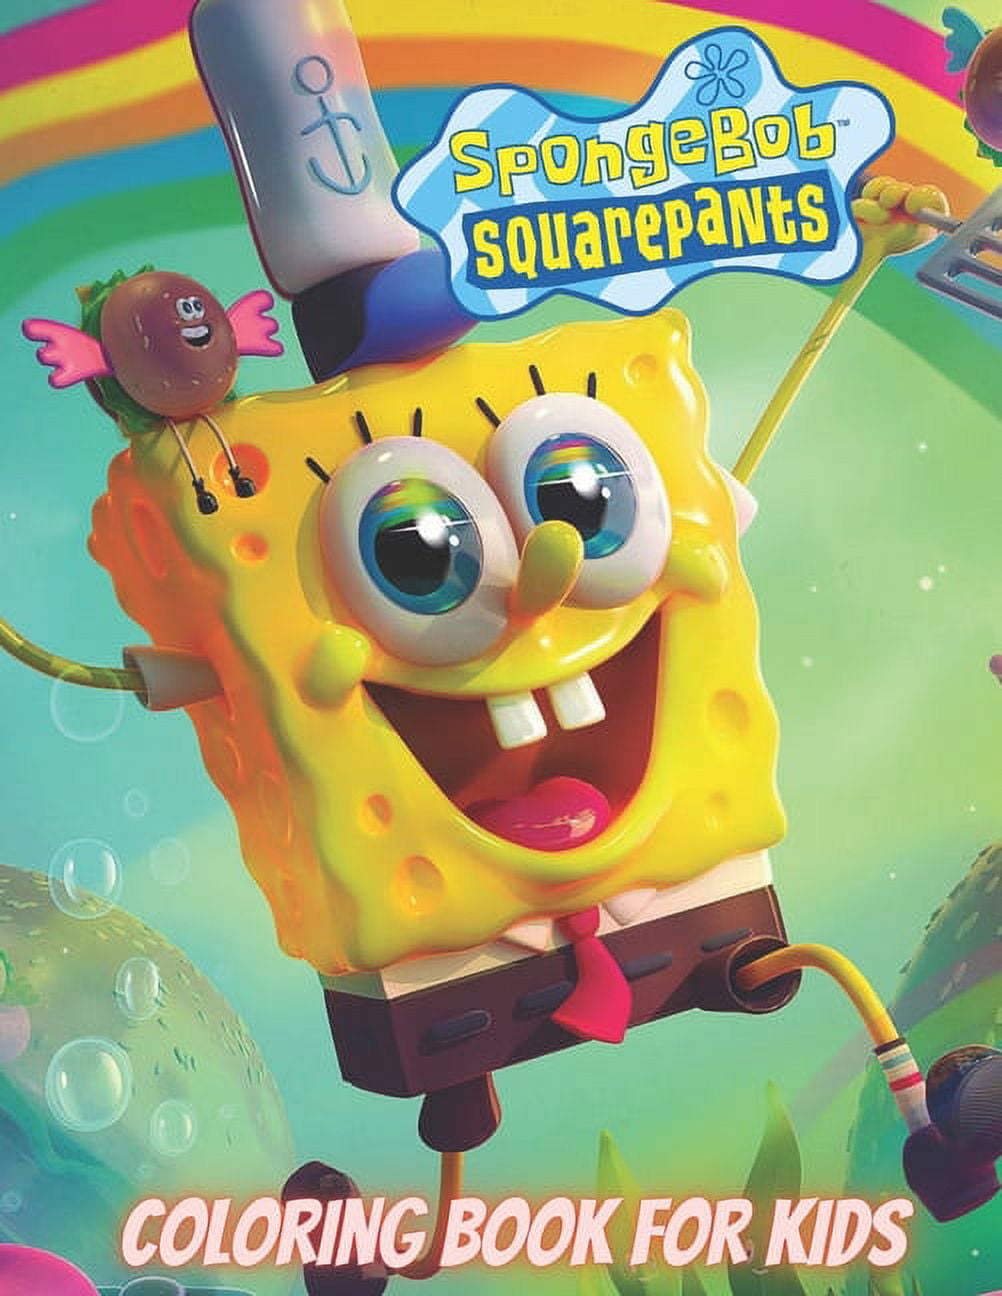 Spongebob Squarepants Coloring Book for kids : Great Gifts For Spongebob  Squarepants Fans & Adults & Kids Ages 3-7, 4-8, 8-10, 8-12. High Quality